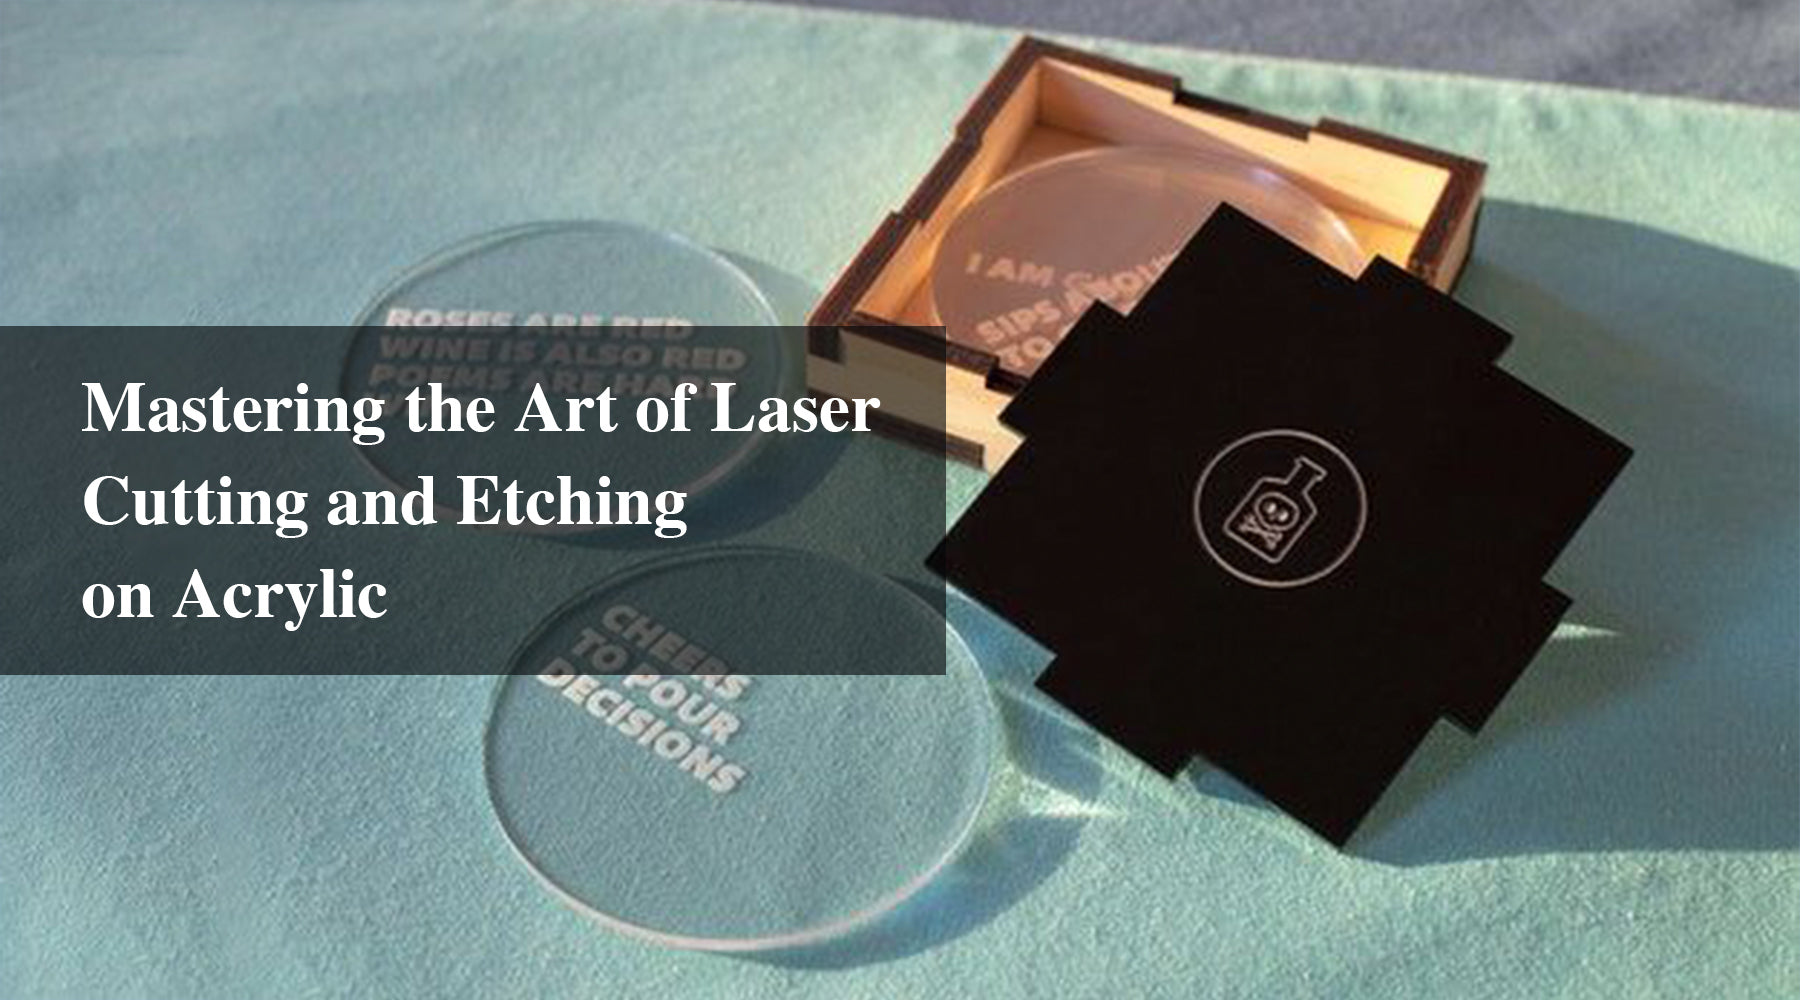 Mastering the Art of Laser Cutting and Etching on Acrylic